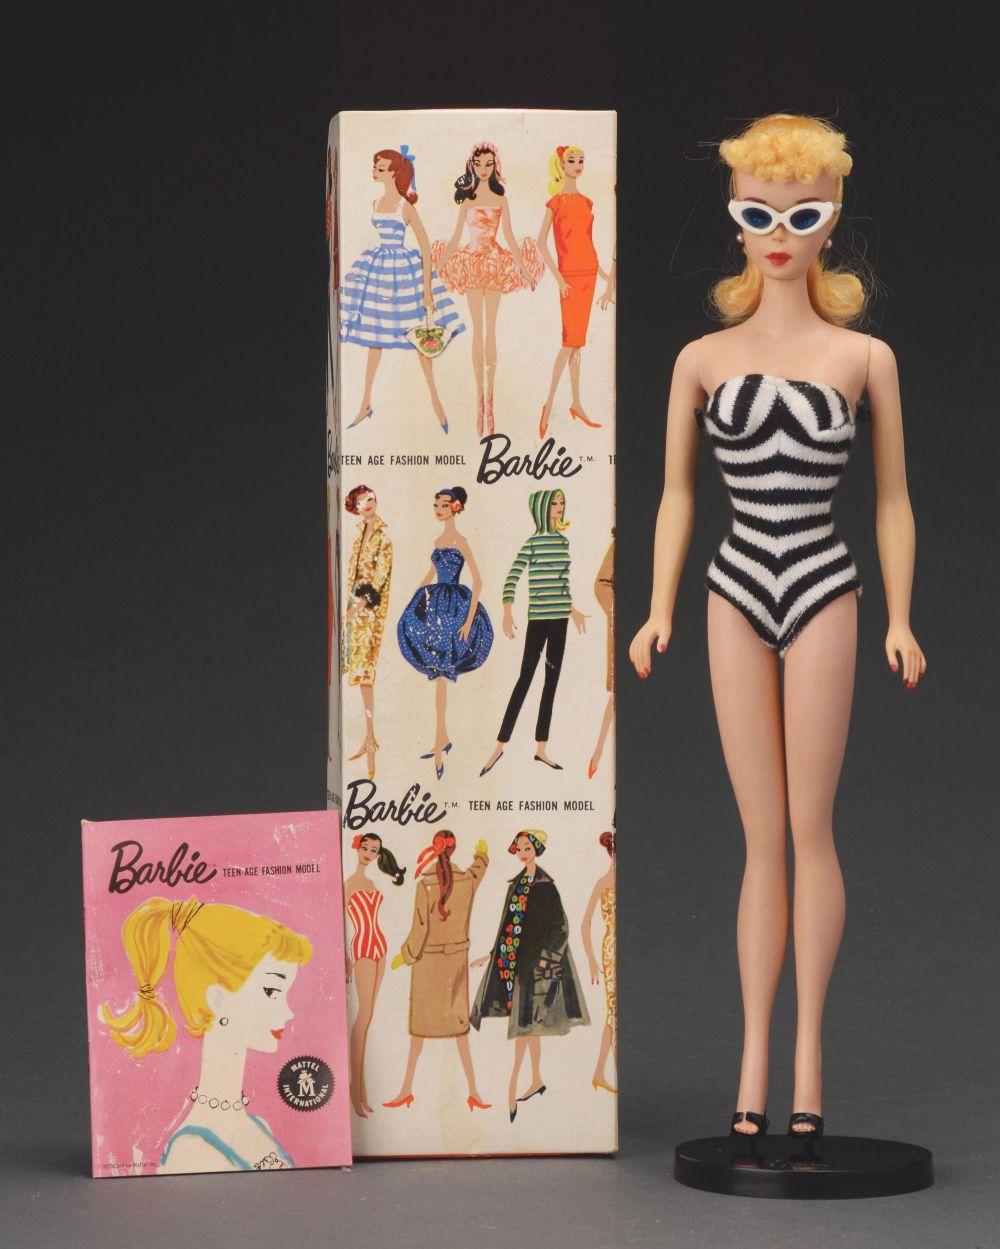 The first original Barbie doll, wearing a black and white swimsuit.